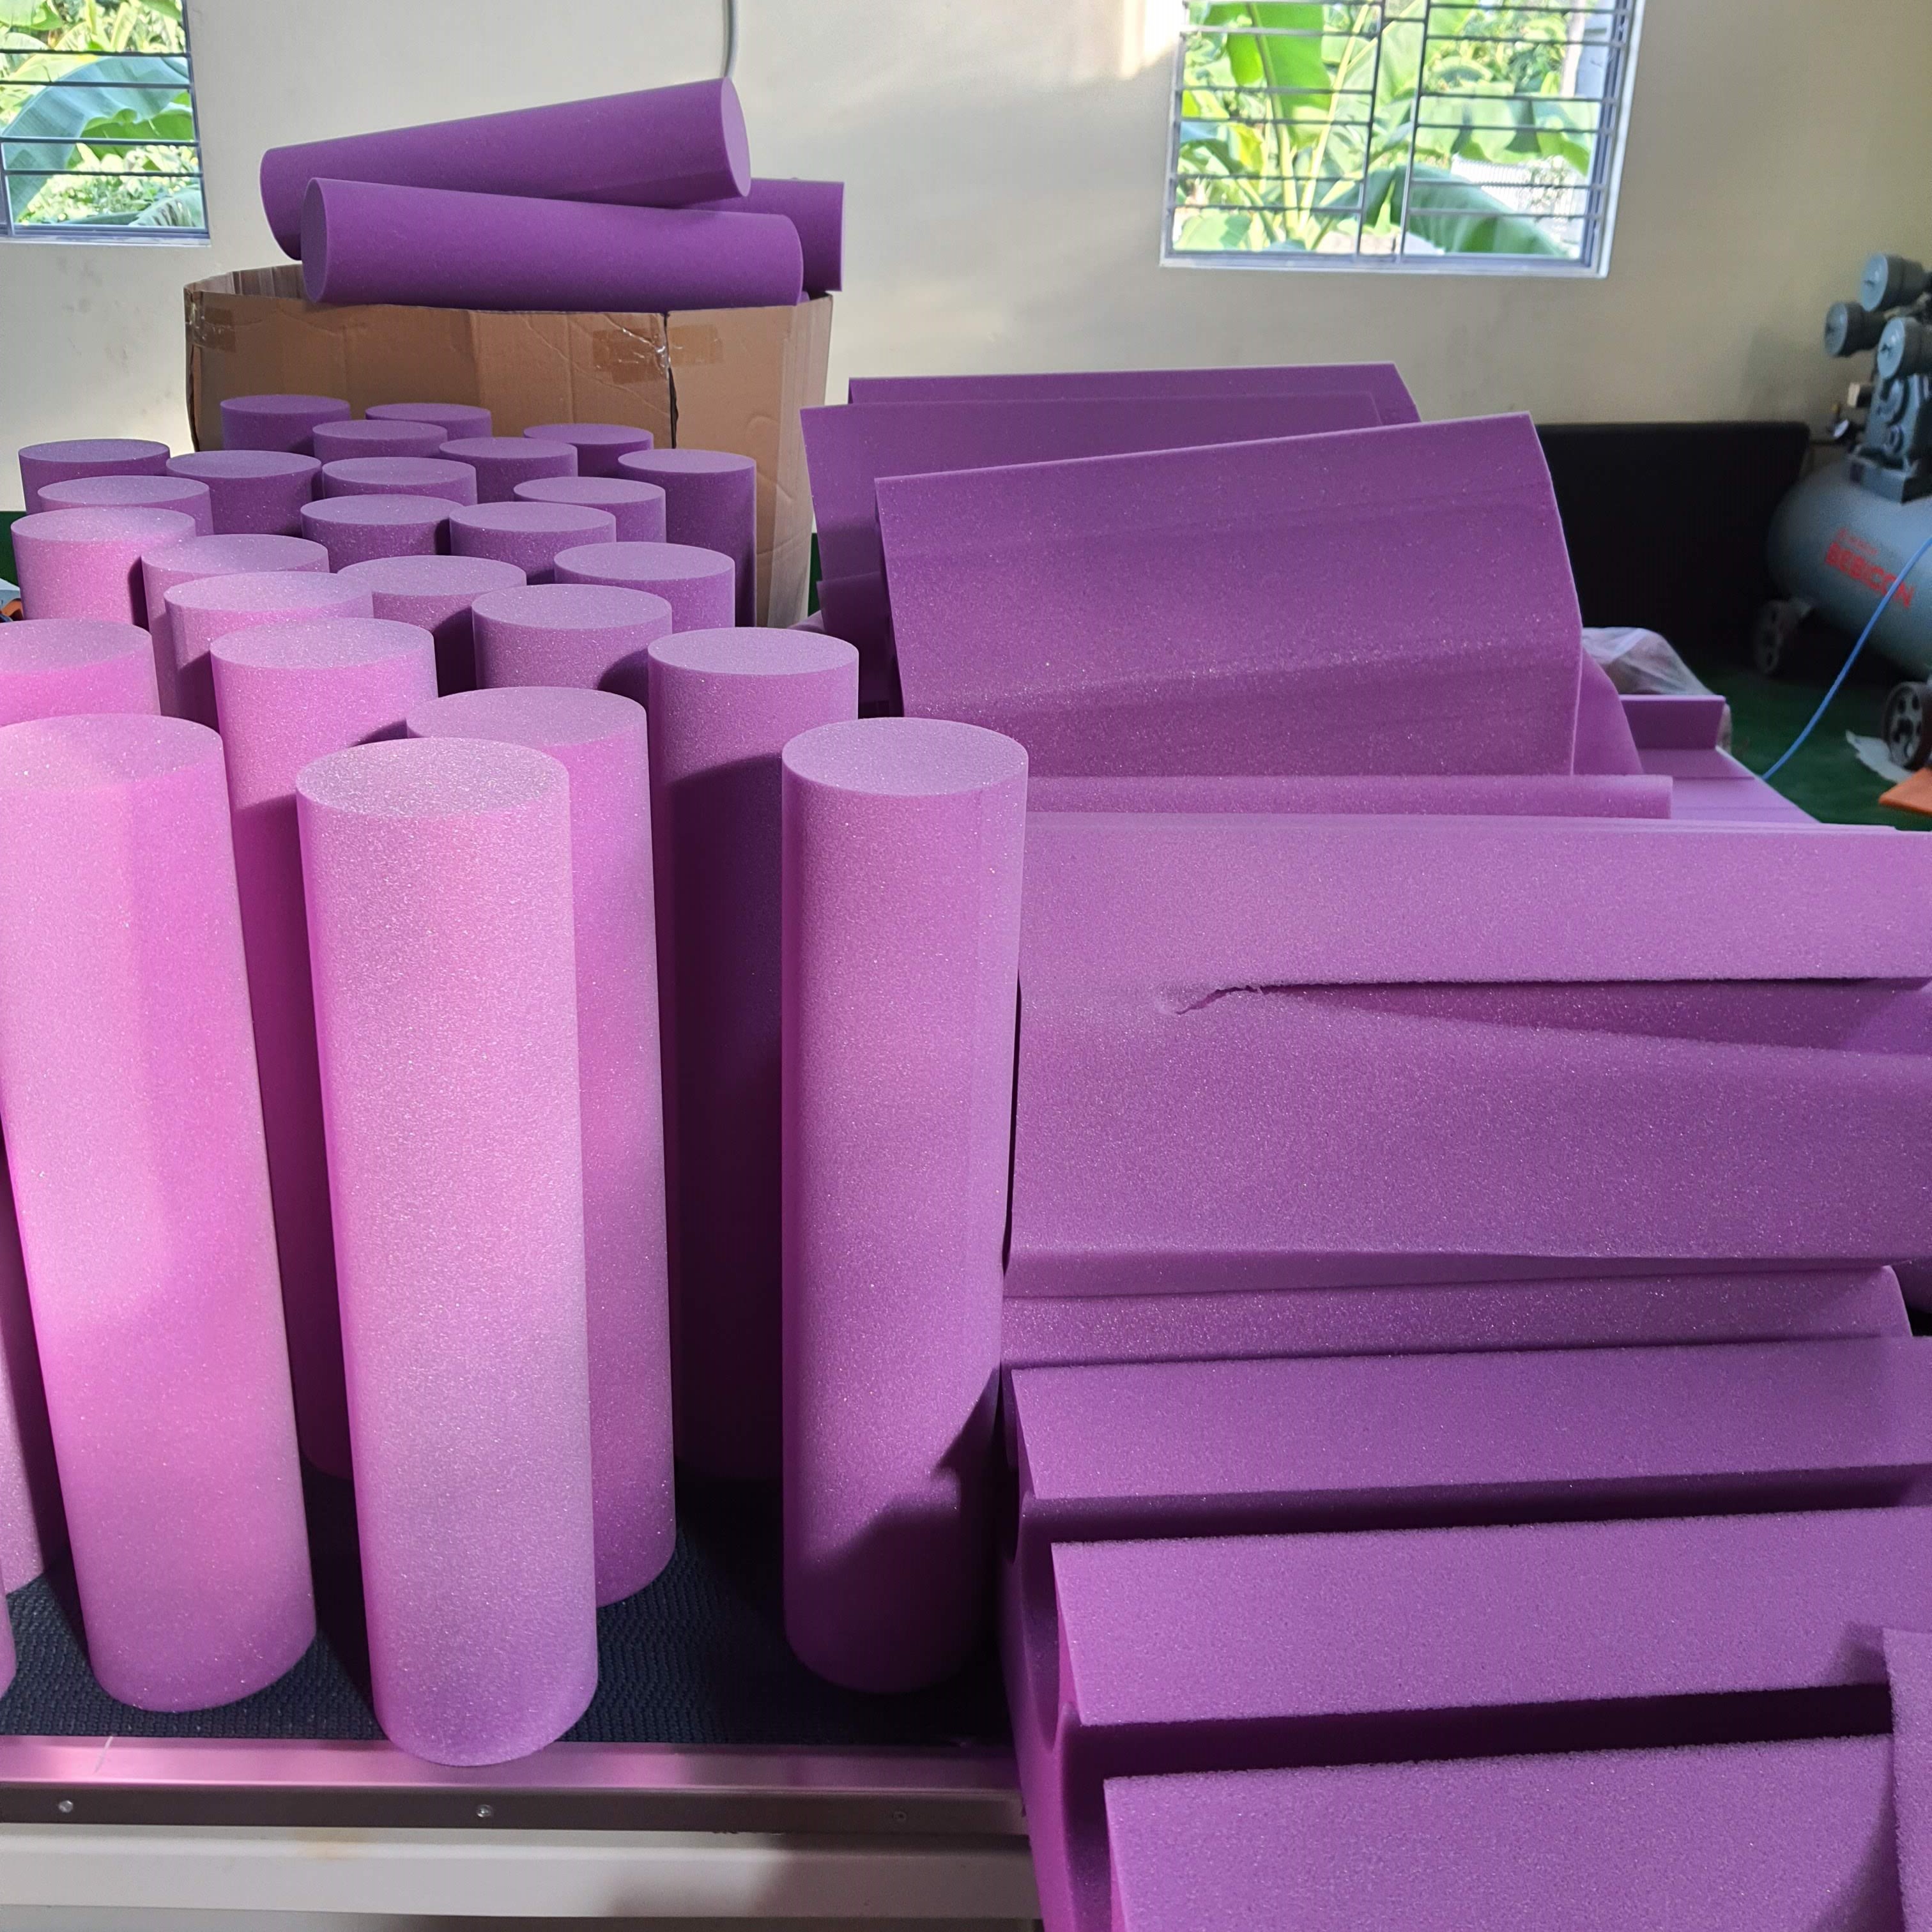 Polyurethane Foam Barrel Good price High Precision Soft Products Material Bags/Boxes Industry Pallets from Vietnam Manufacturer 5